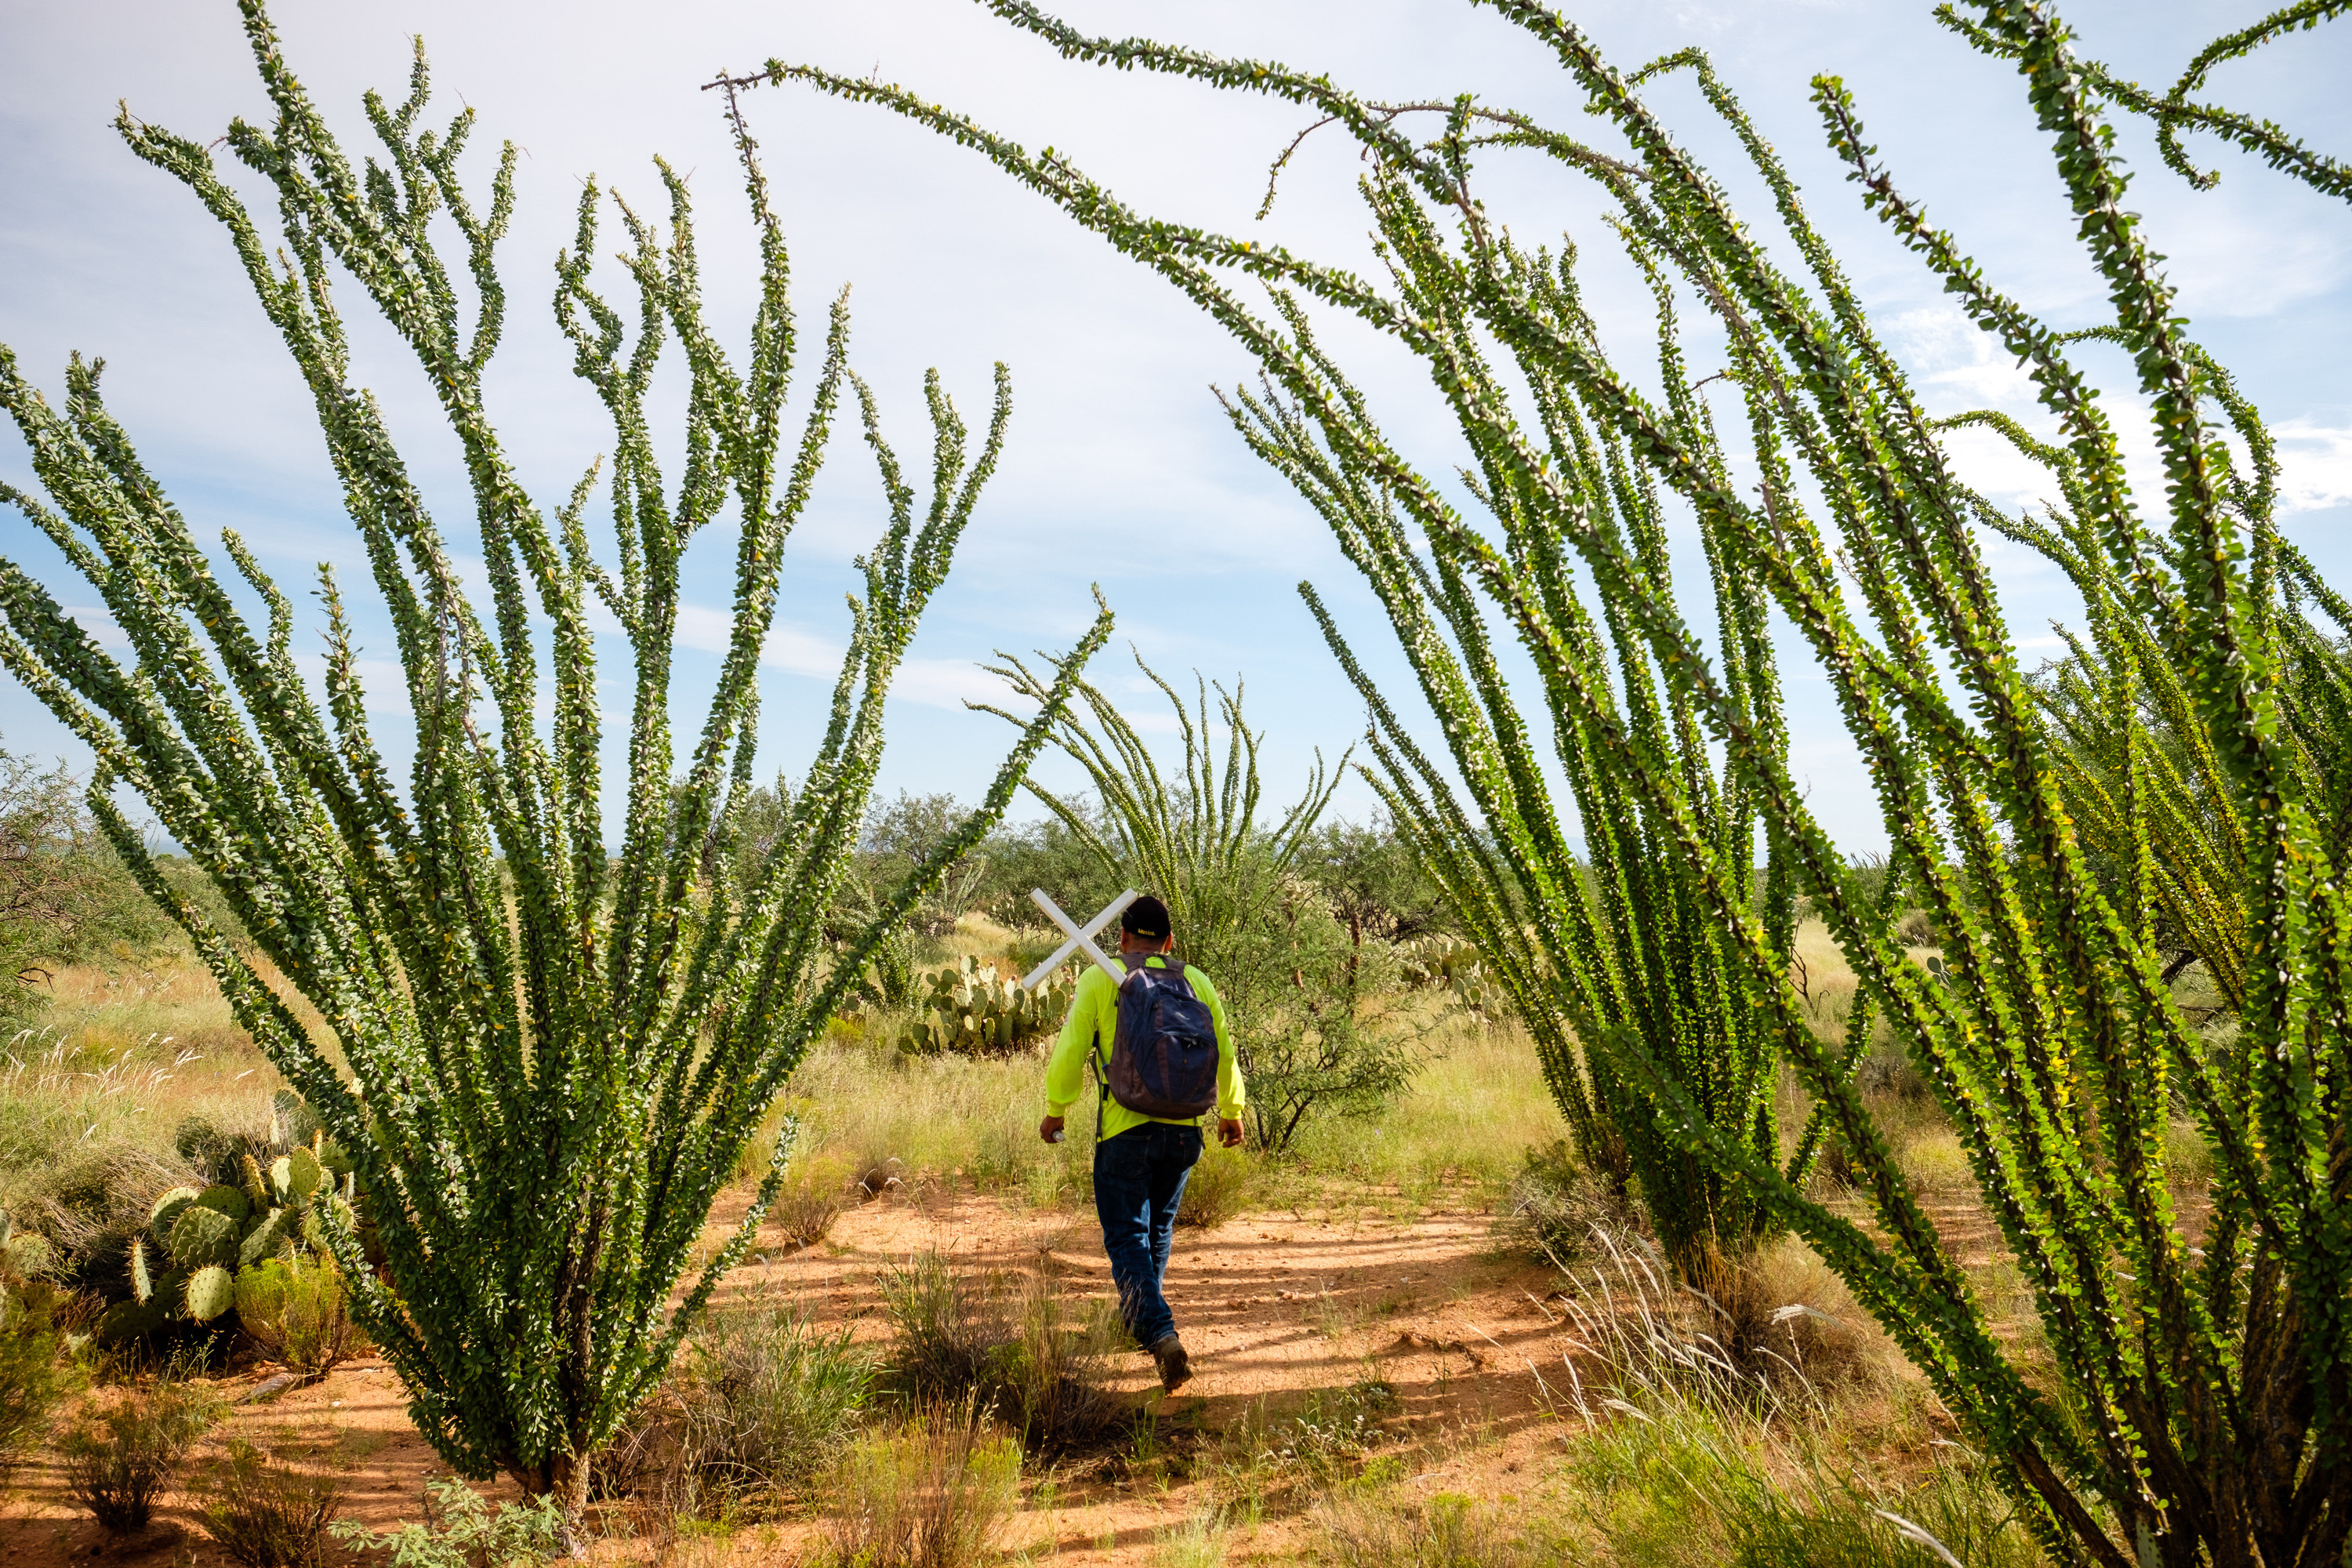 A person walks between bushels of a tall, spindly plant in the desert with a cross in their backpack